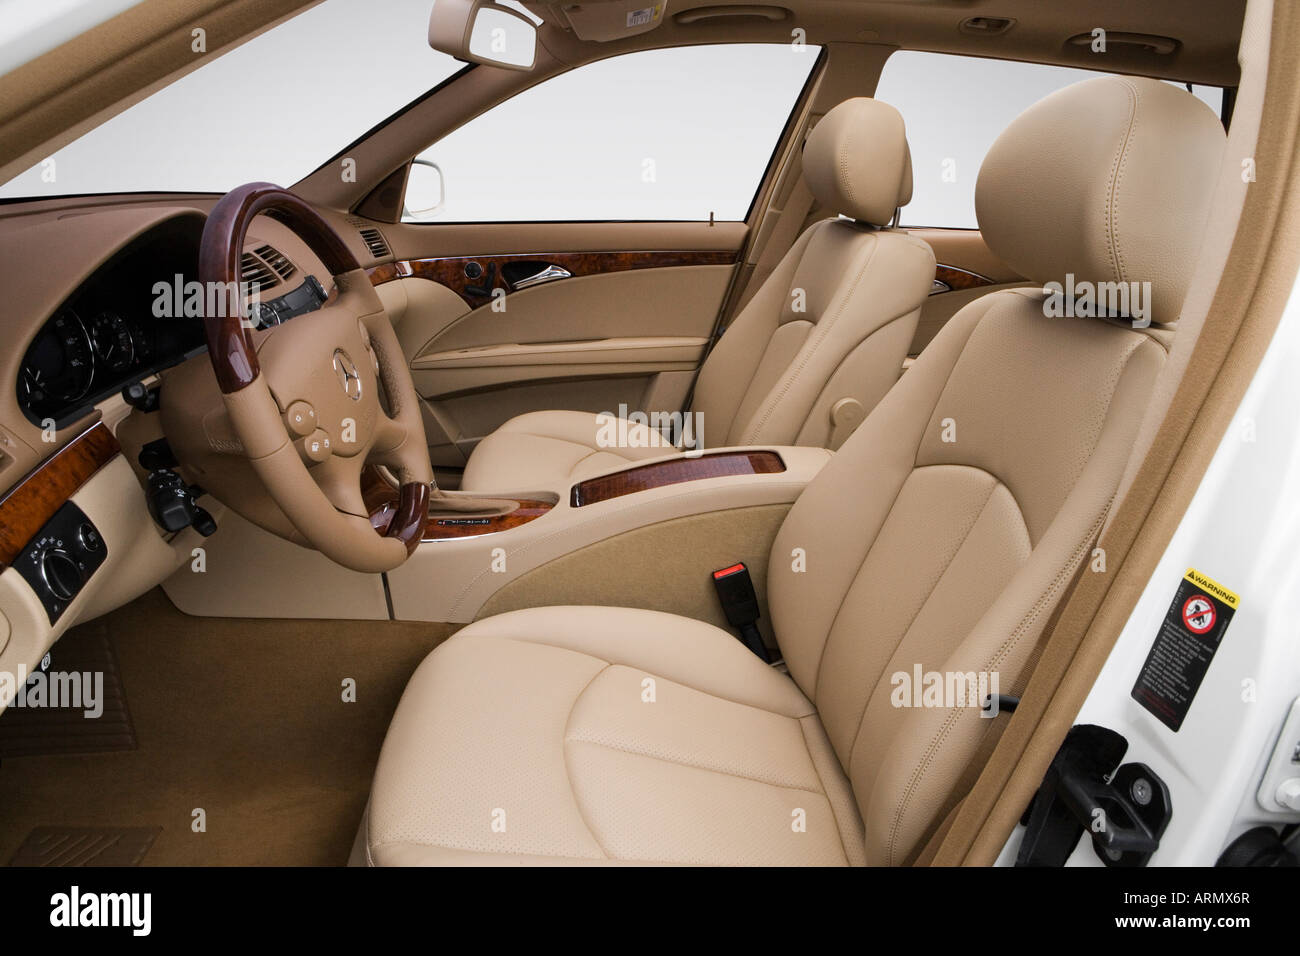 08 Mercedes Benz E Class 50 4matic In White Front Seats Stock Photo Alamy